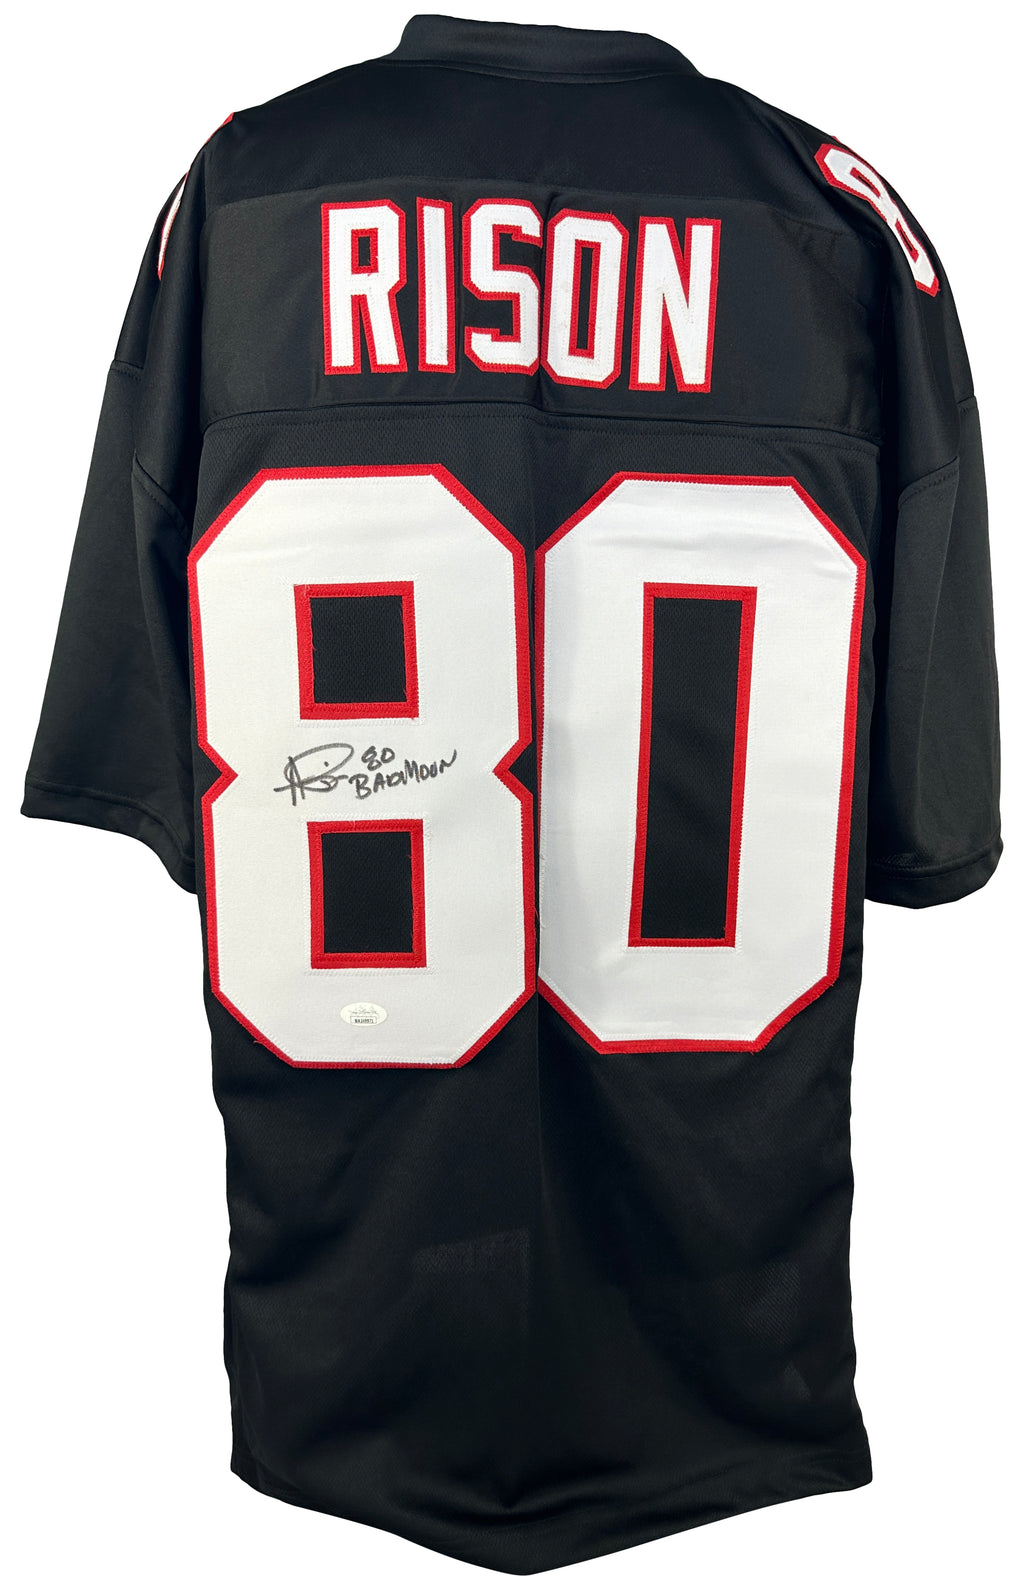 Andre Rison autographed signed inscribed black Pro Style jersey JSA COA